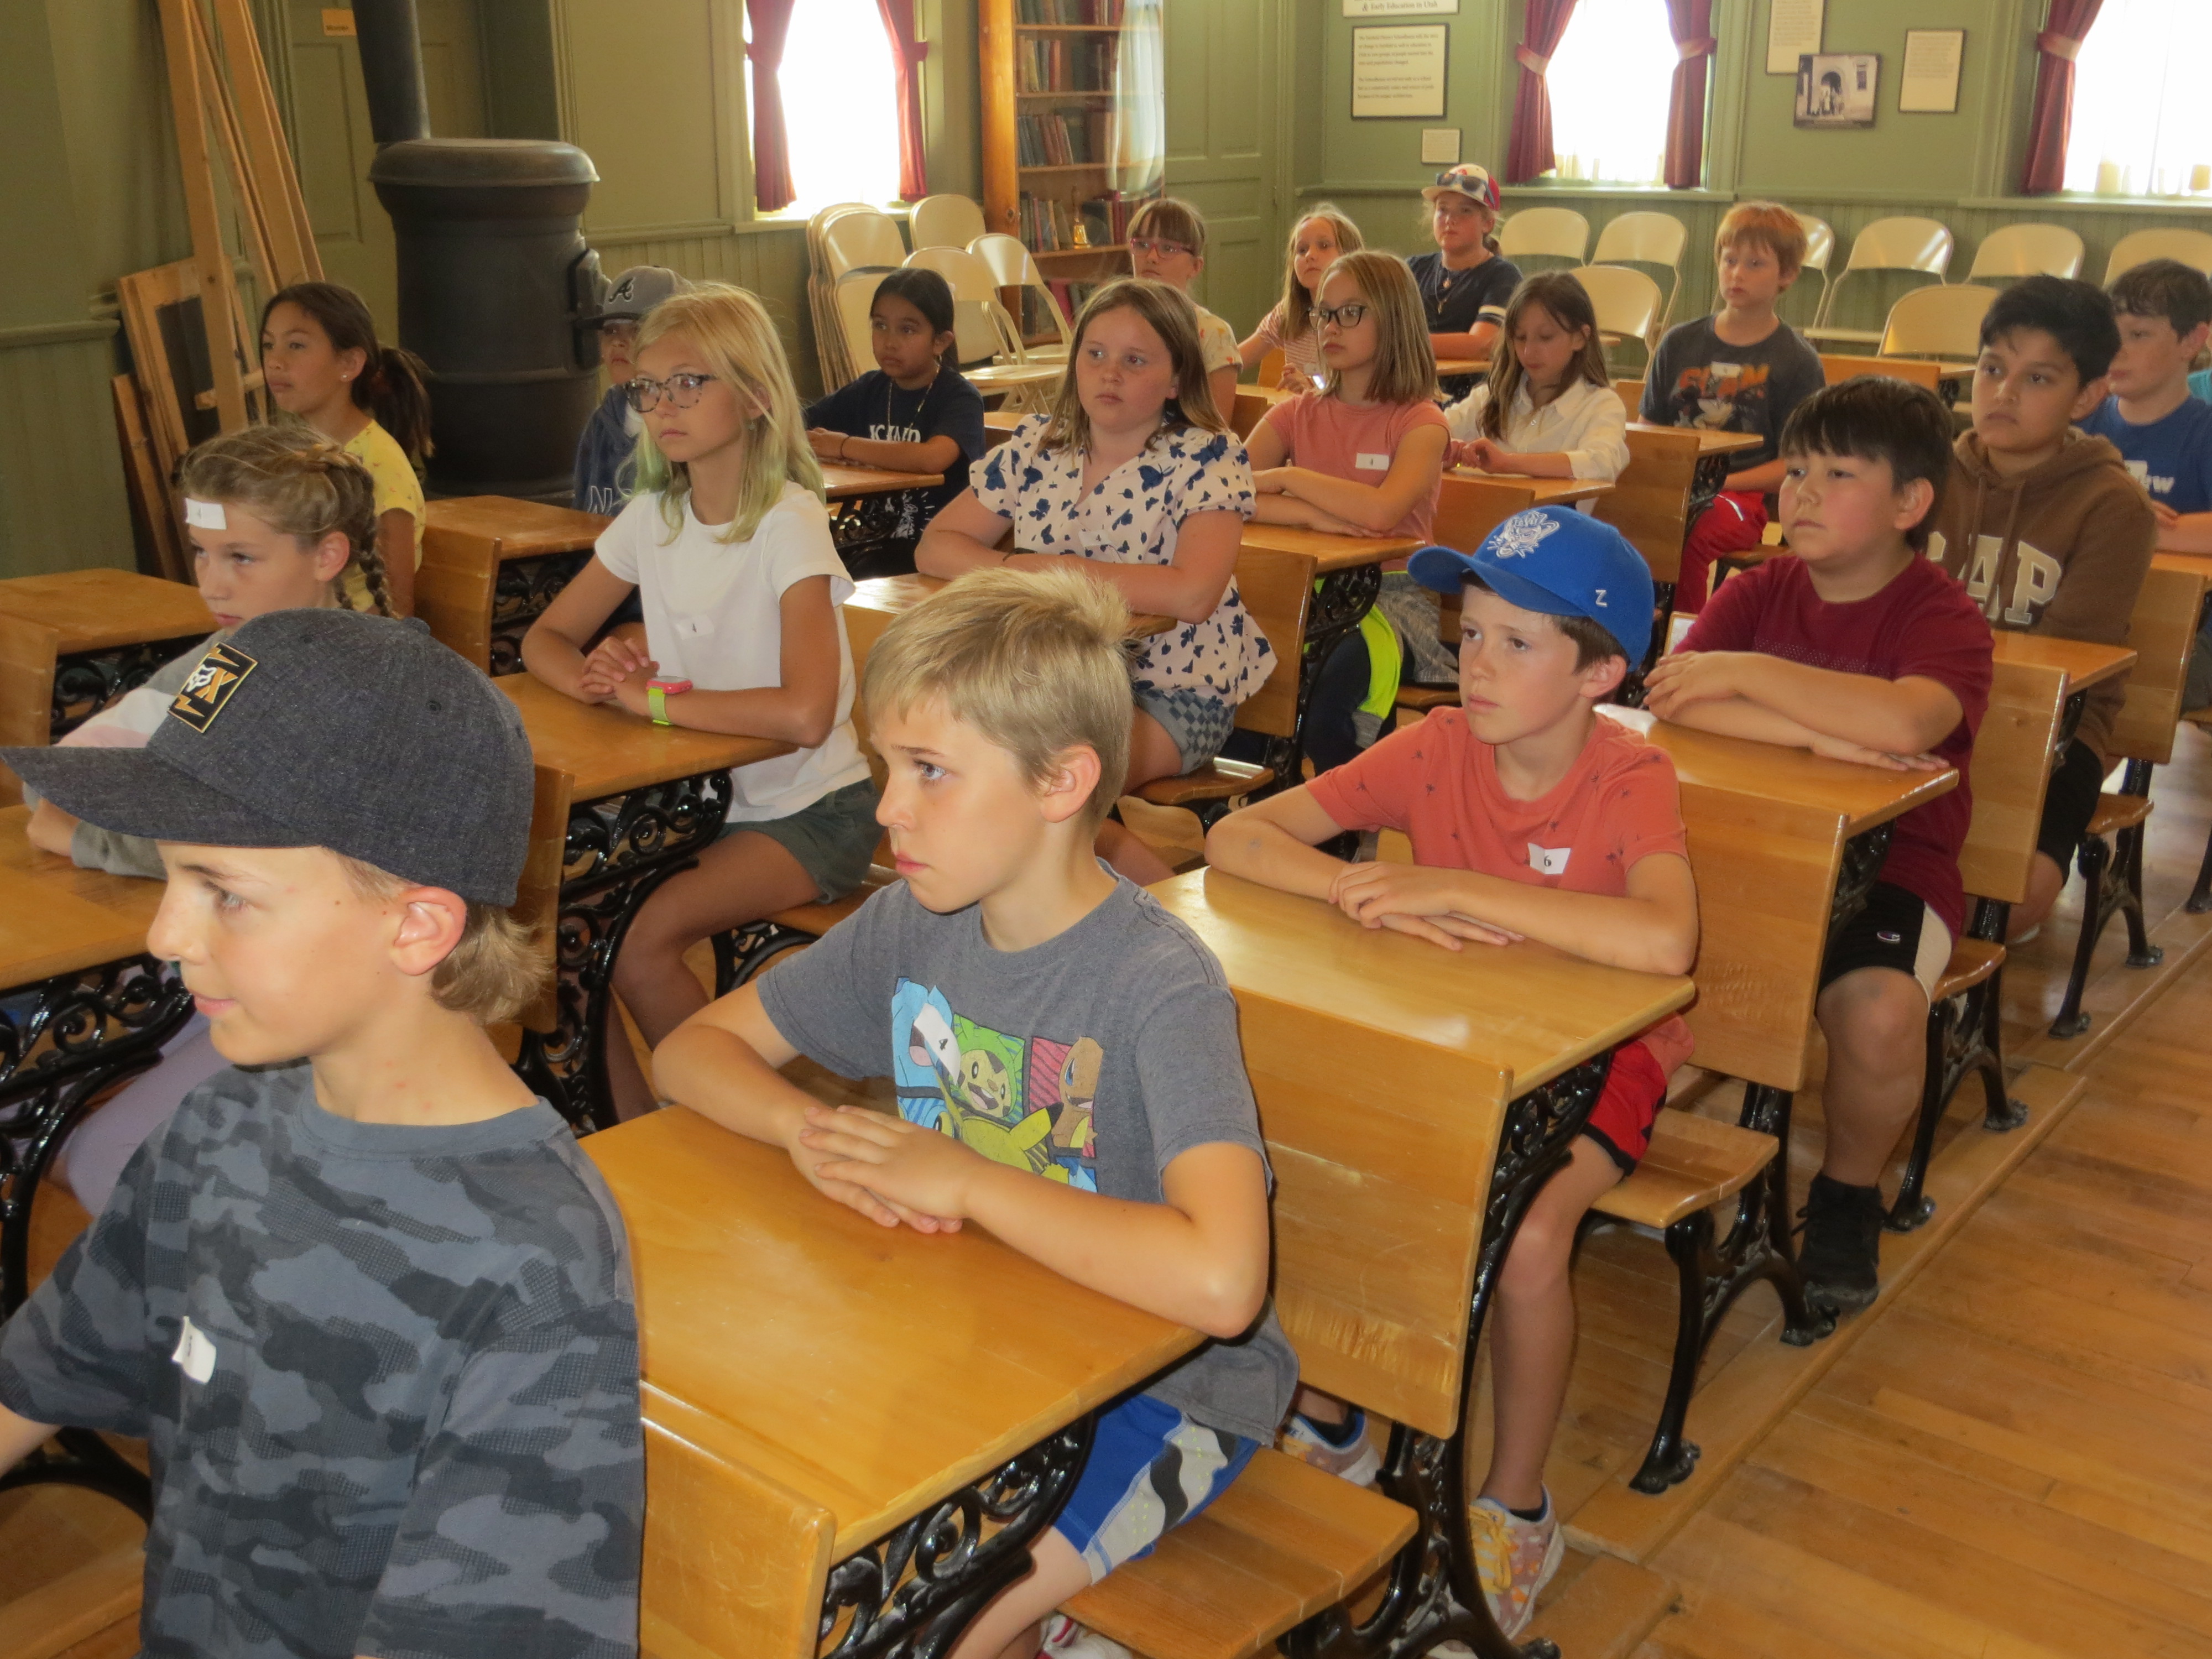 Students sitting at desks in old school room.